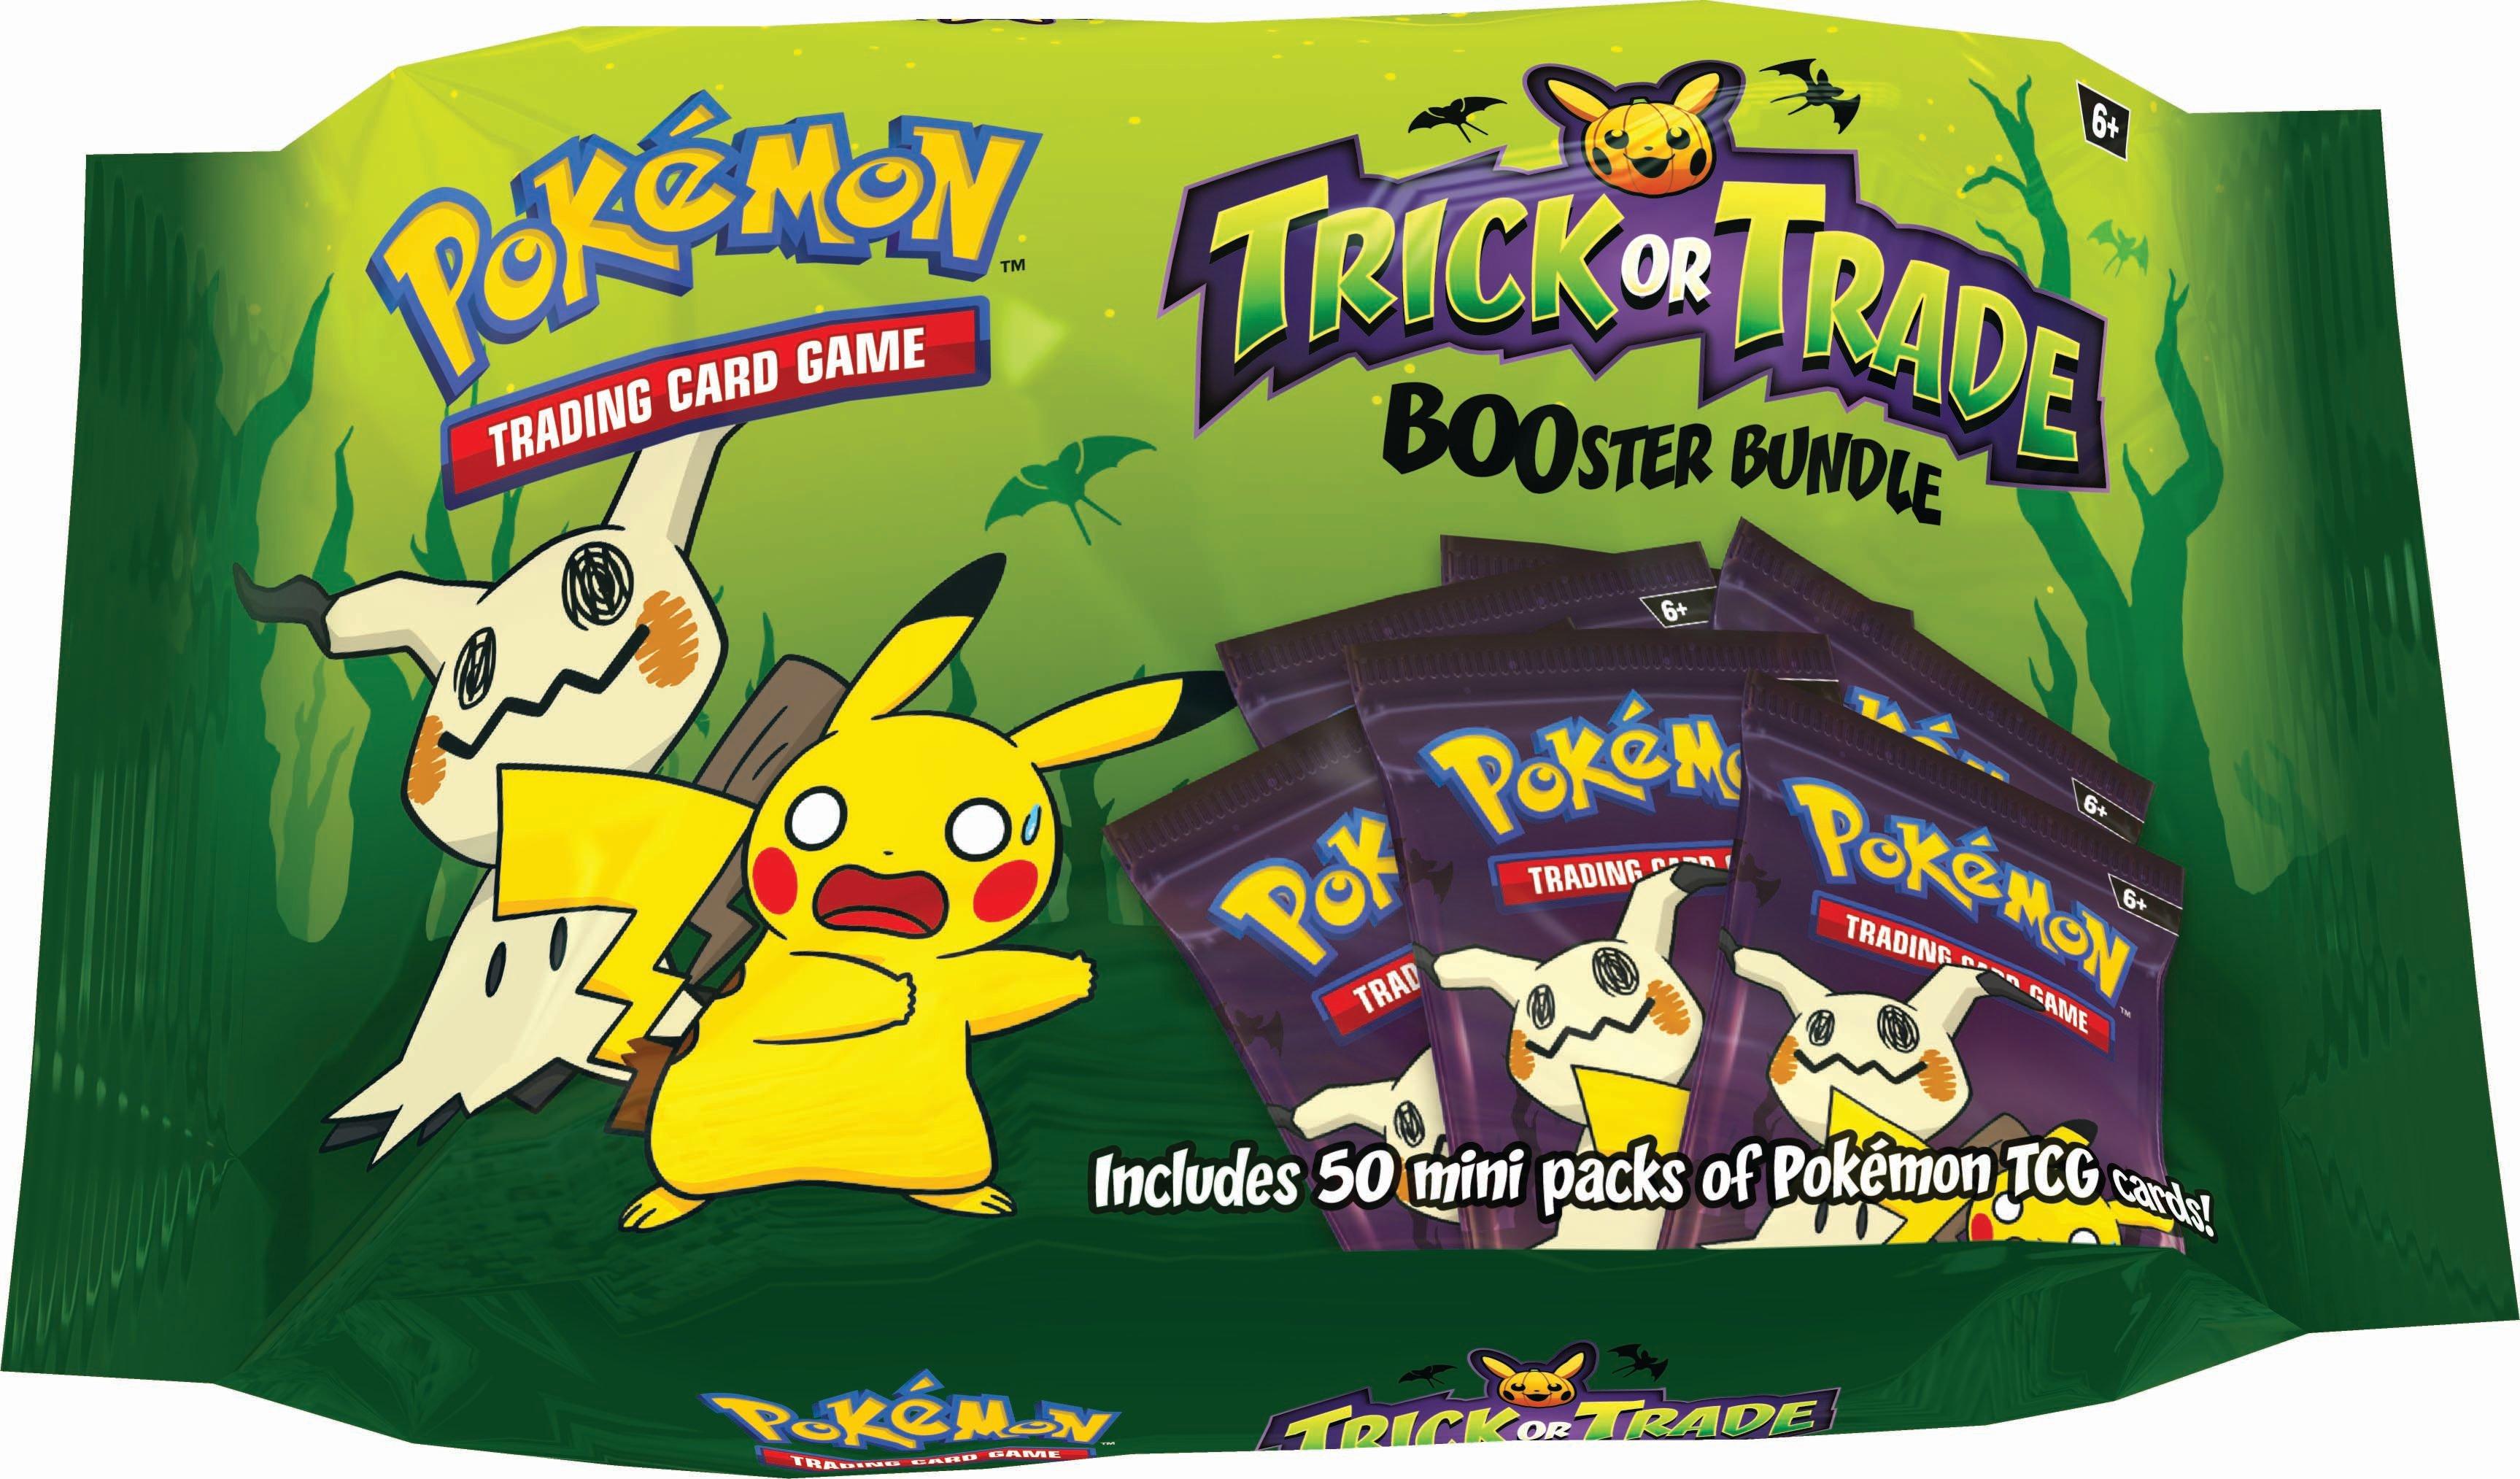 There's a new Pokémon trading card game coming to PC